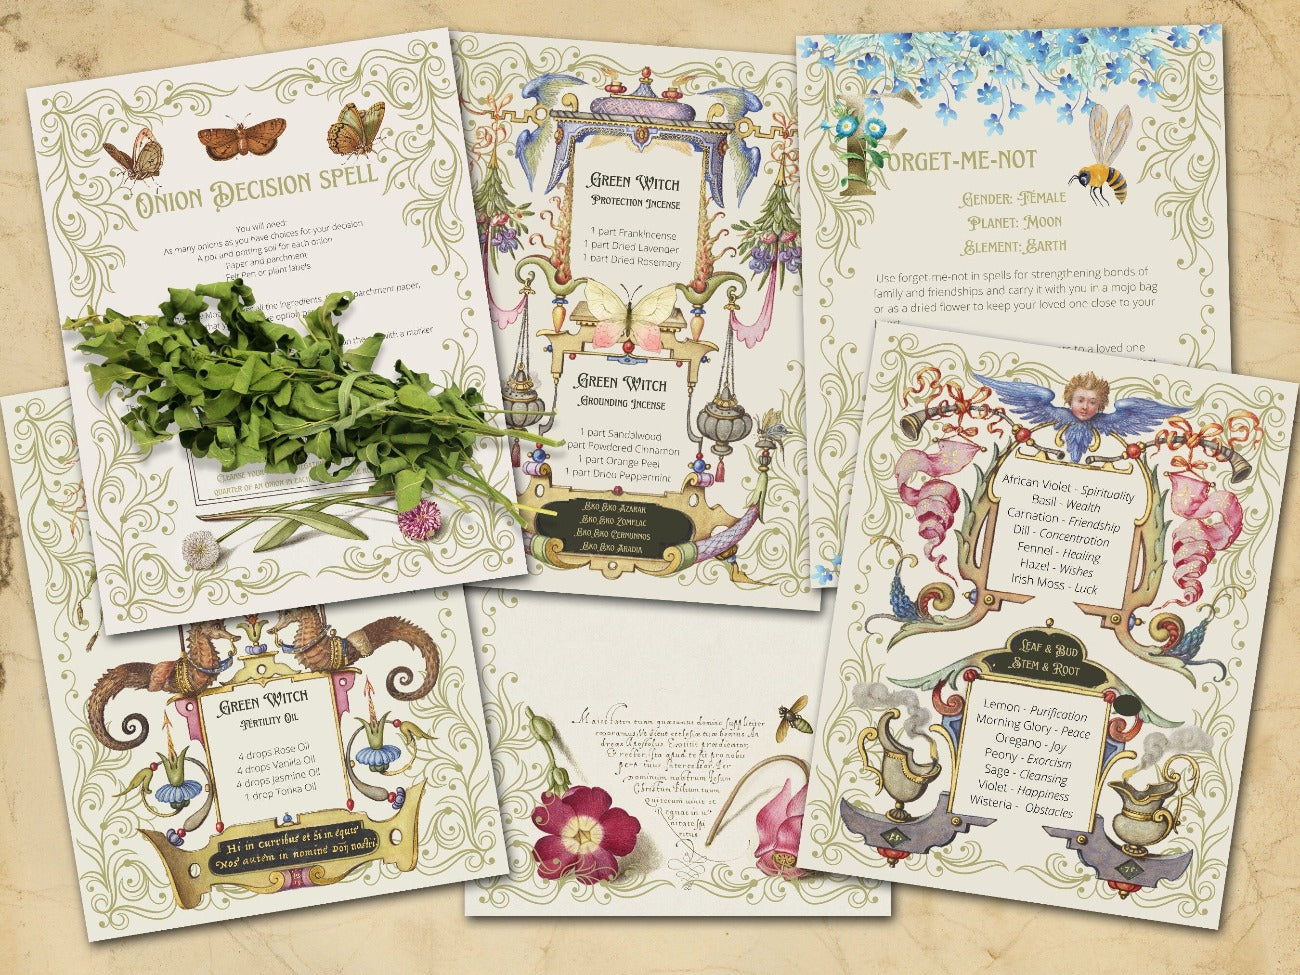 Six Green Witch Garden Pages include Onion Decision Spell, Forget Me Not, Fancy floral blank page, Herb Correspondences, Green Witch Oil Recipes, and Green Witch Incense Recipes.